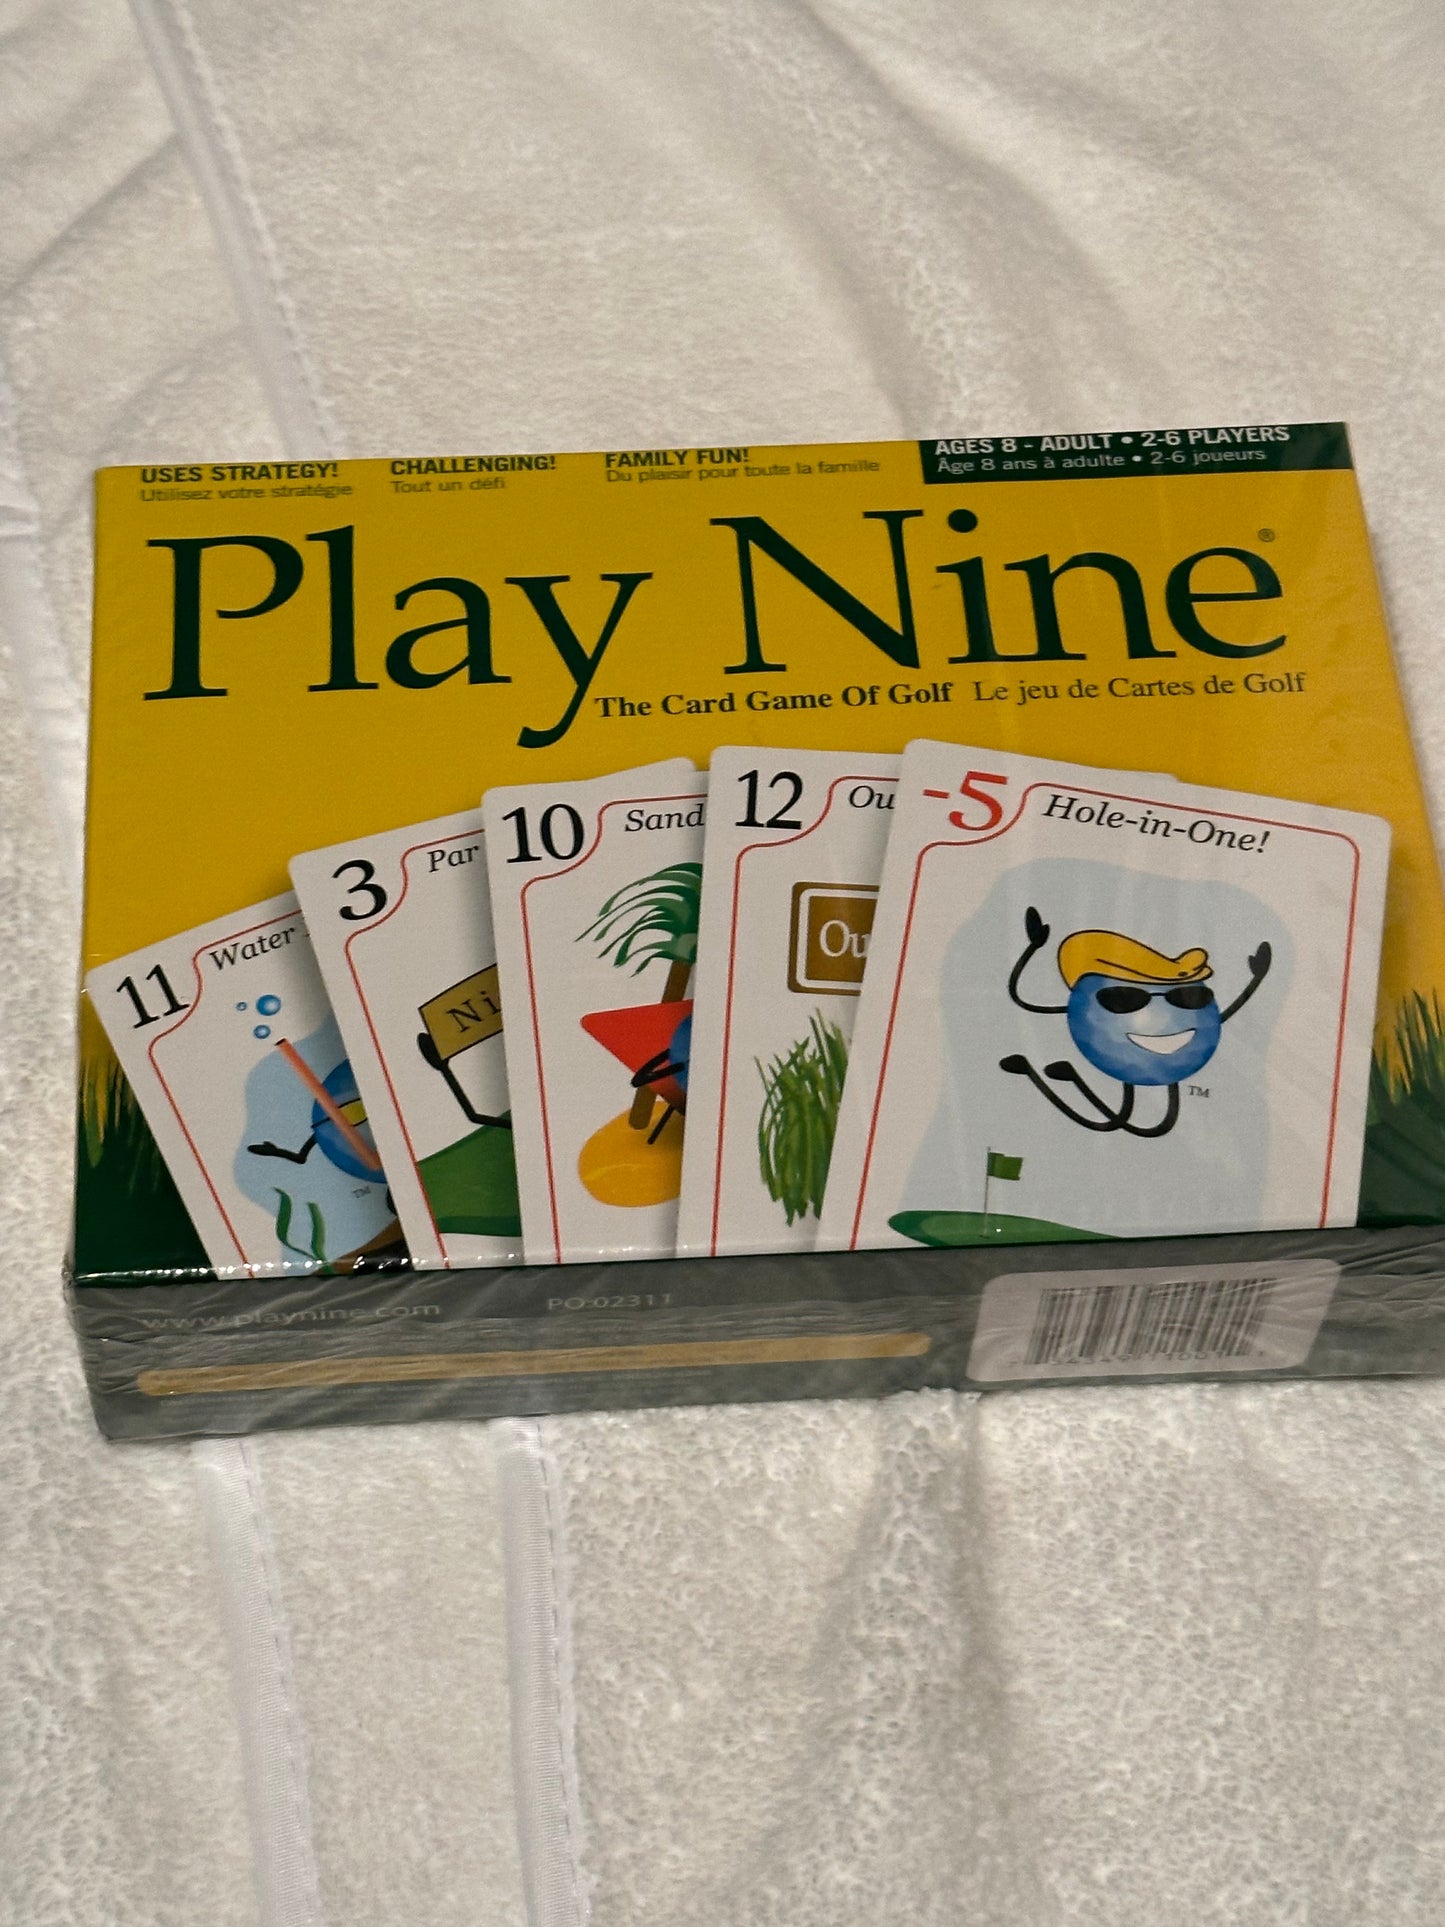 Score a Hole-in-One with Play Nine: The Ultimate Card Game of Golf Fun!